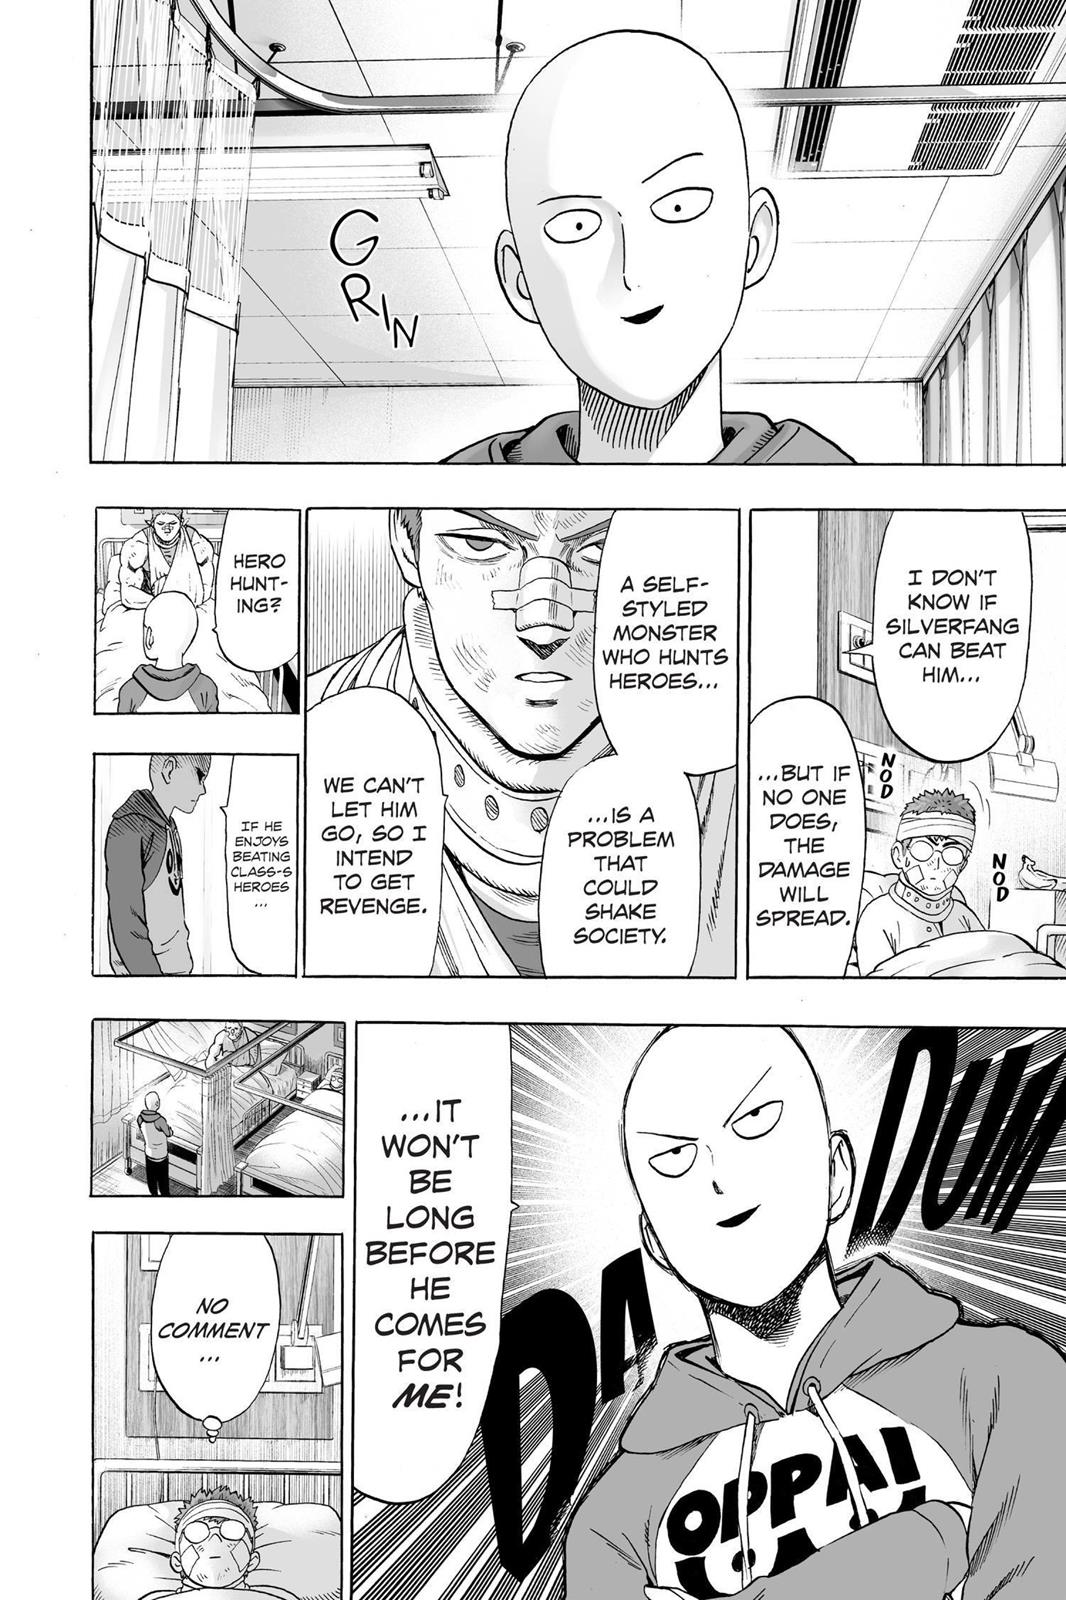 One-Punch Man, Punch 49 image 07